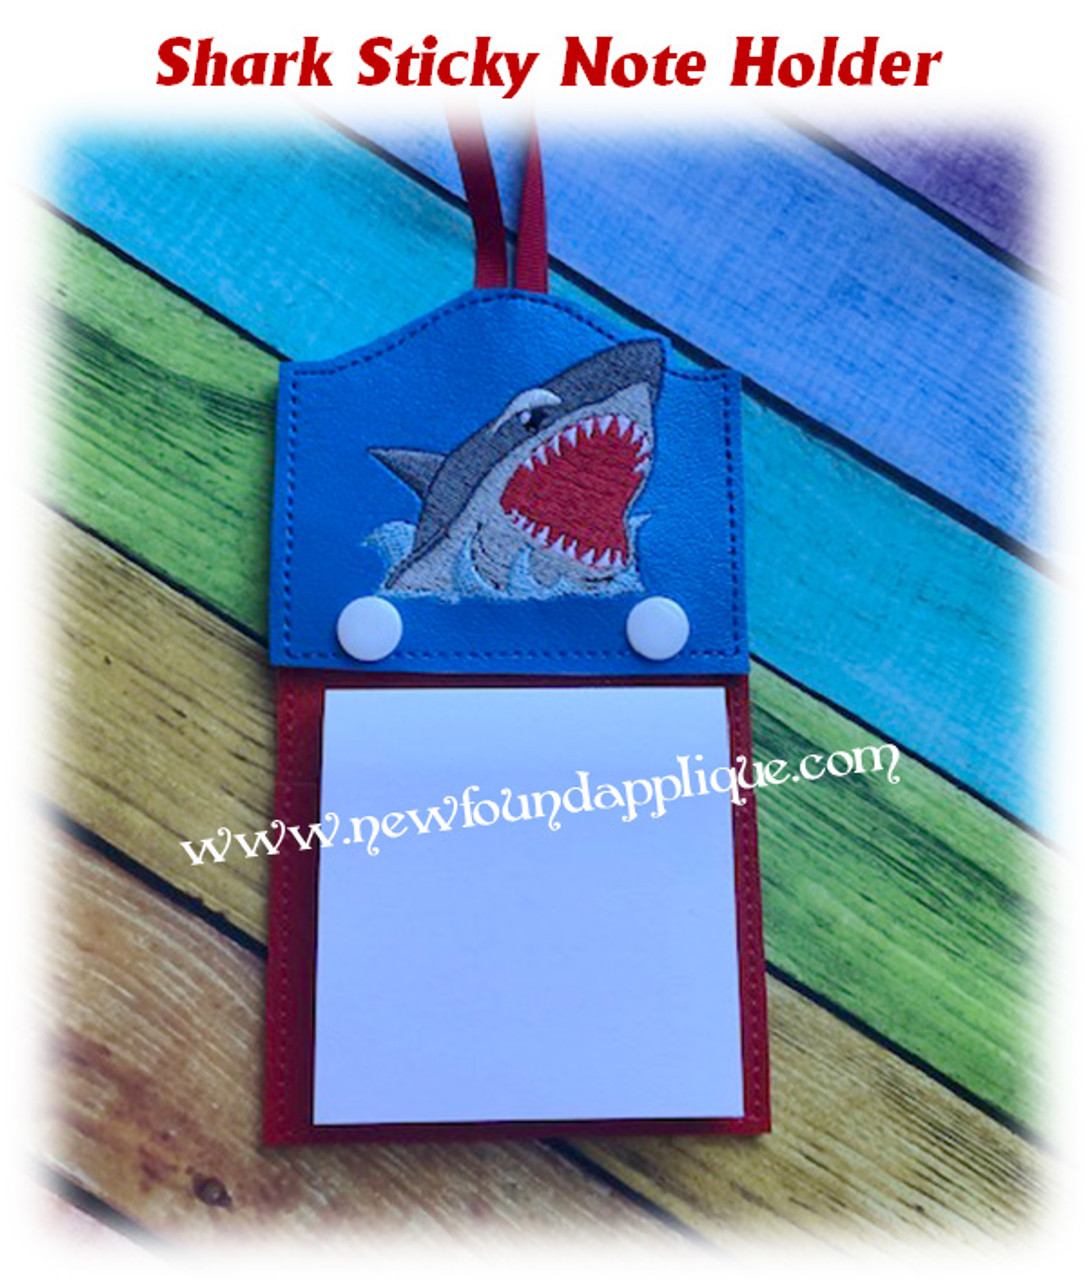 https://cdn11.bigcommerce.com/s-856b5/images/stencil/1280x1280/products/2739/15350/shark_sticky_note_holder__22561.1615919396.jpg?c=2